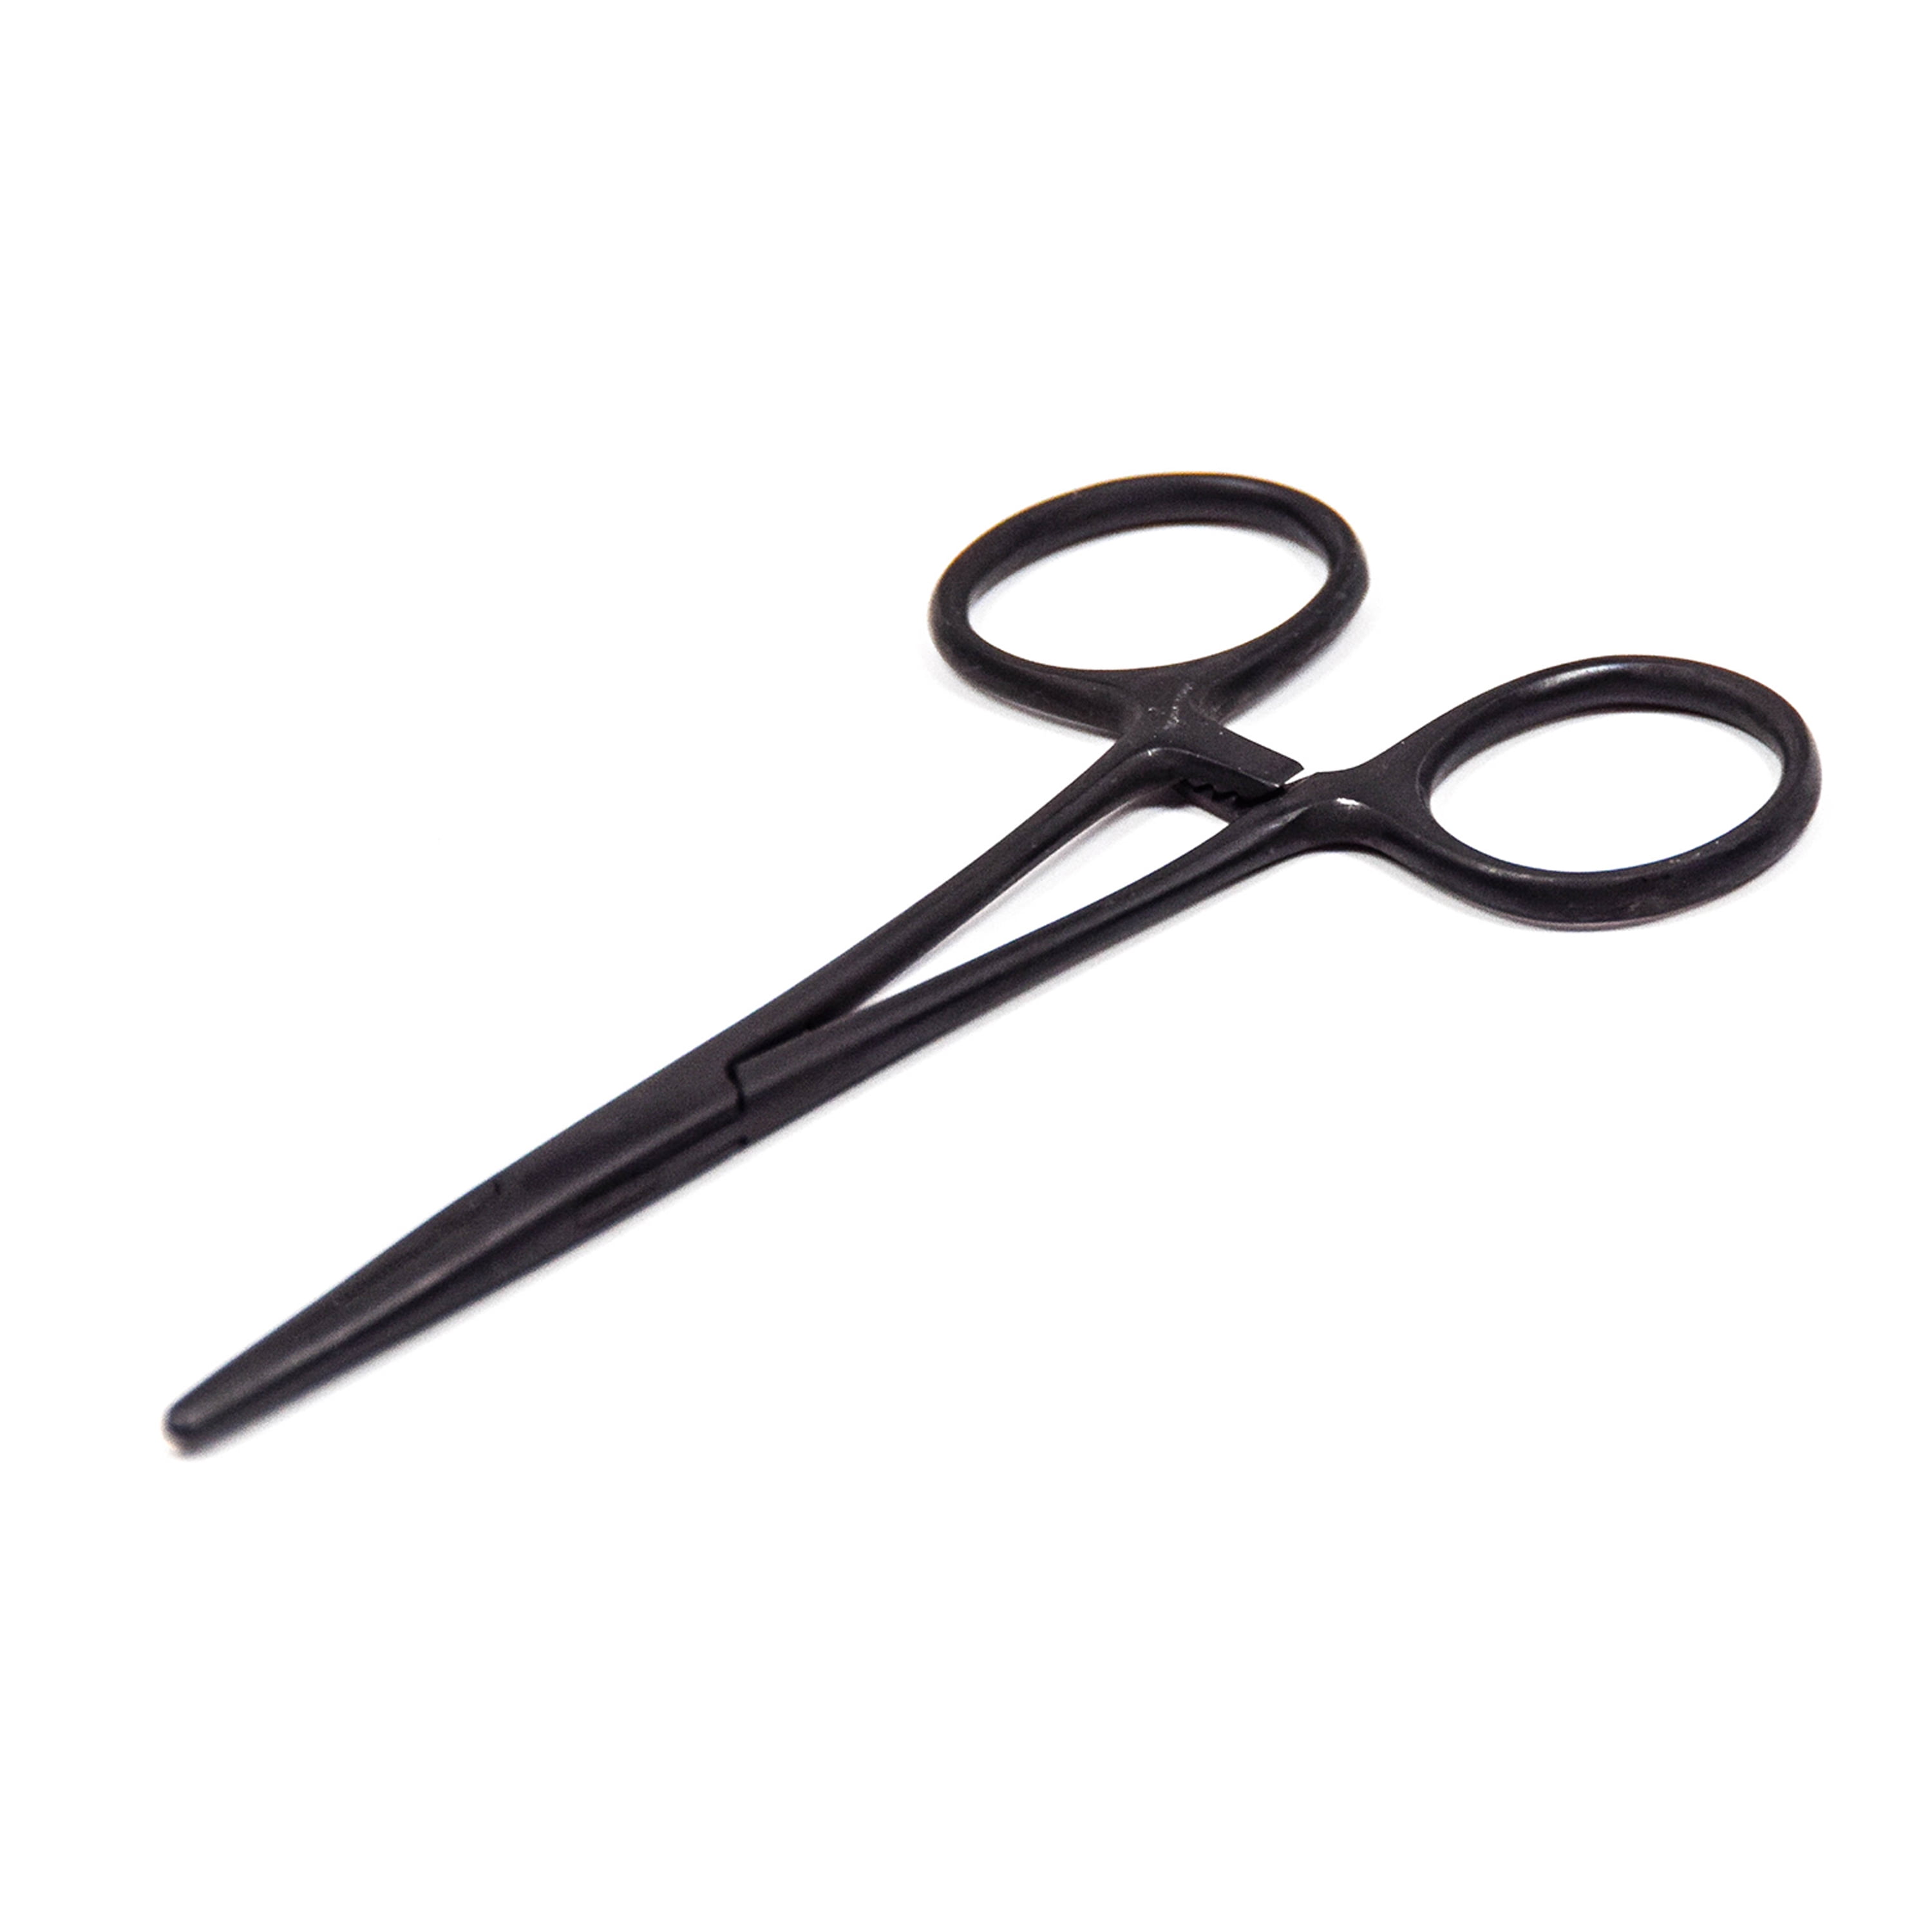 Cortland Fairplay 5.5 inch Black Stainless Steel Forceps Fly Fishing Tool,  664098 